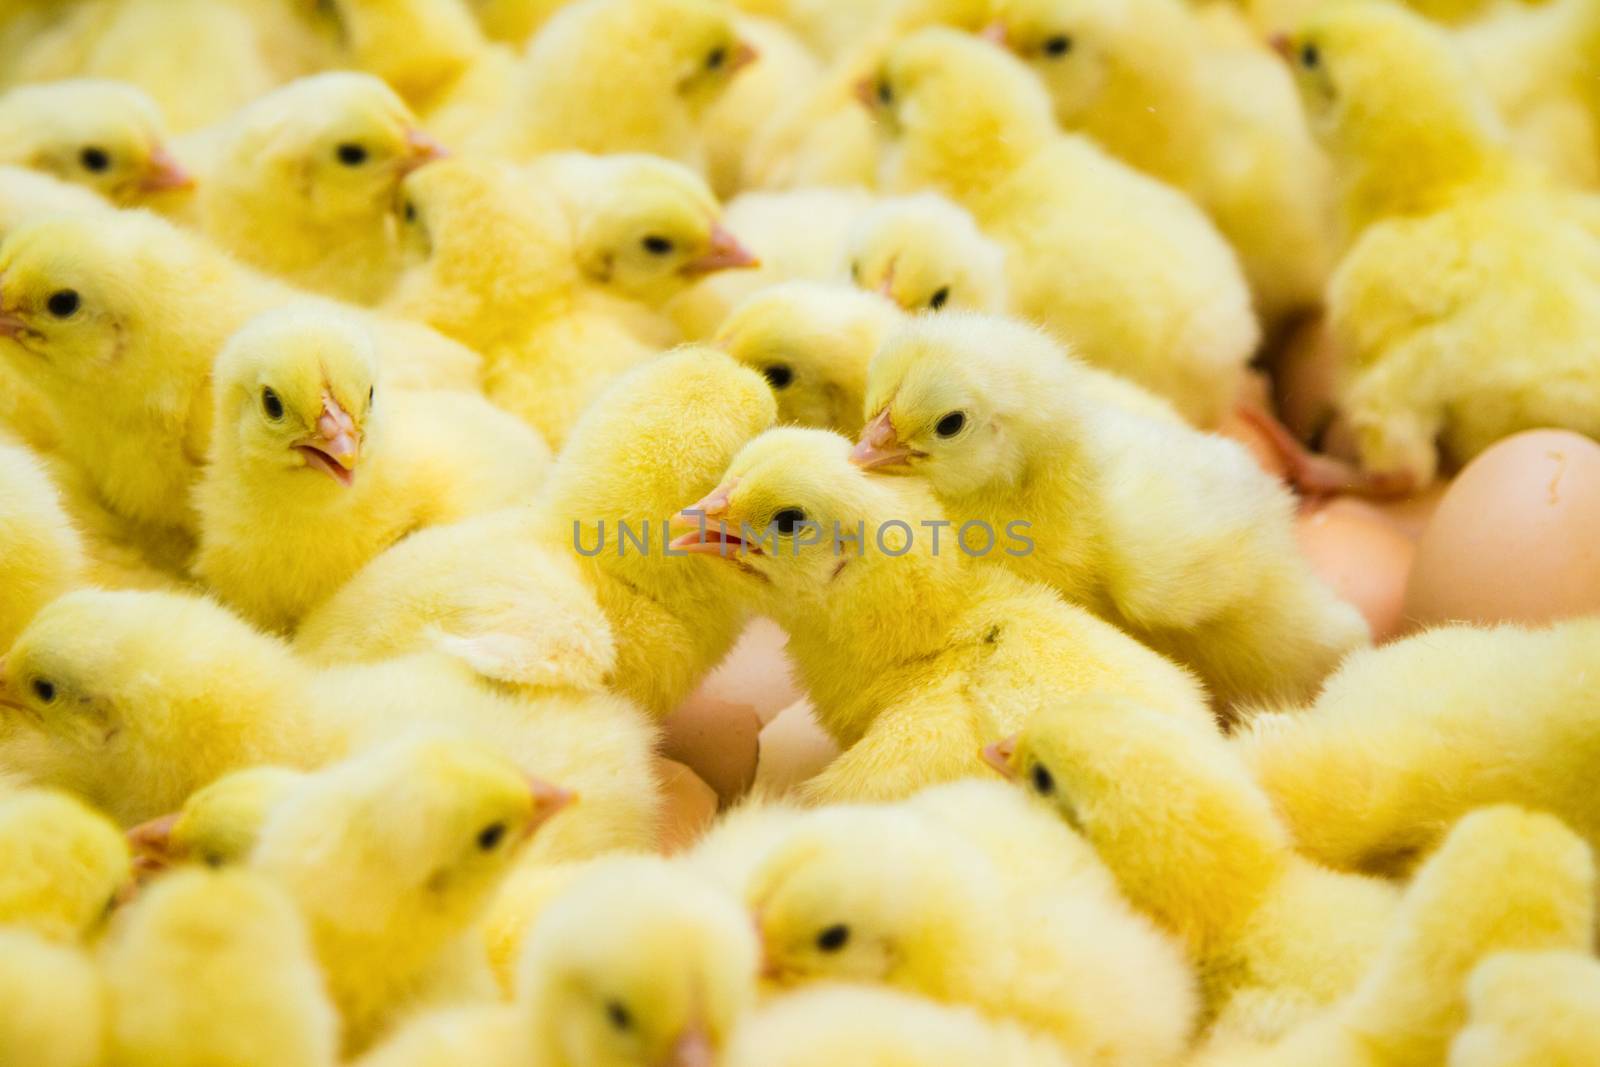 Newly hatched chicks by grigorenko